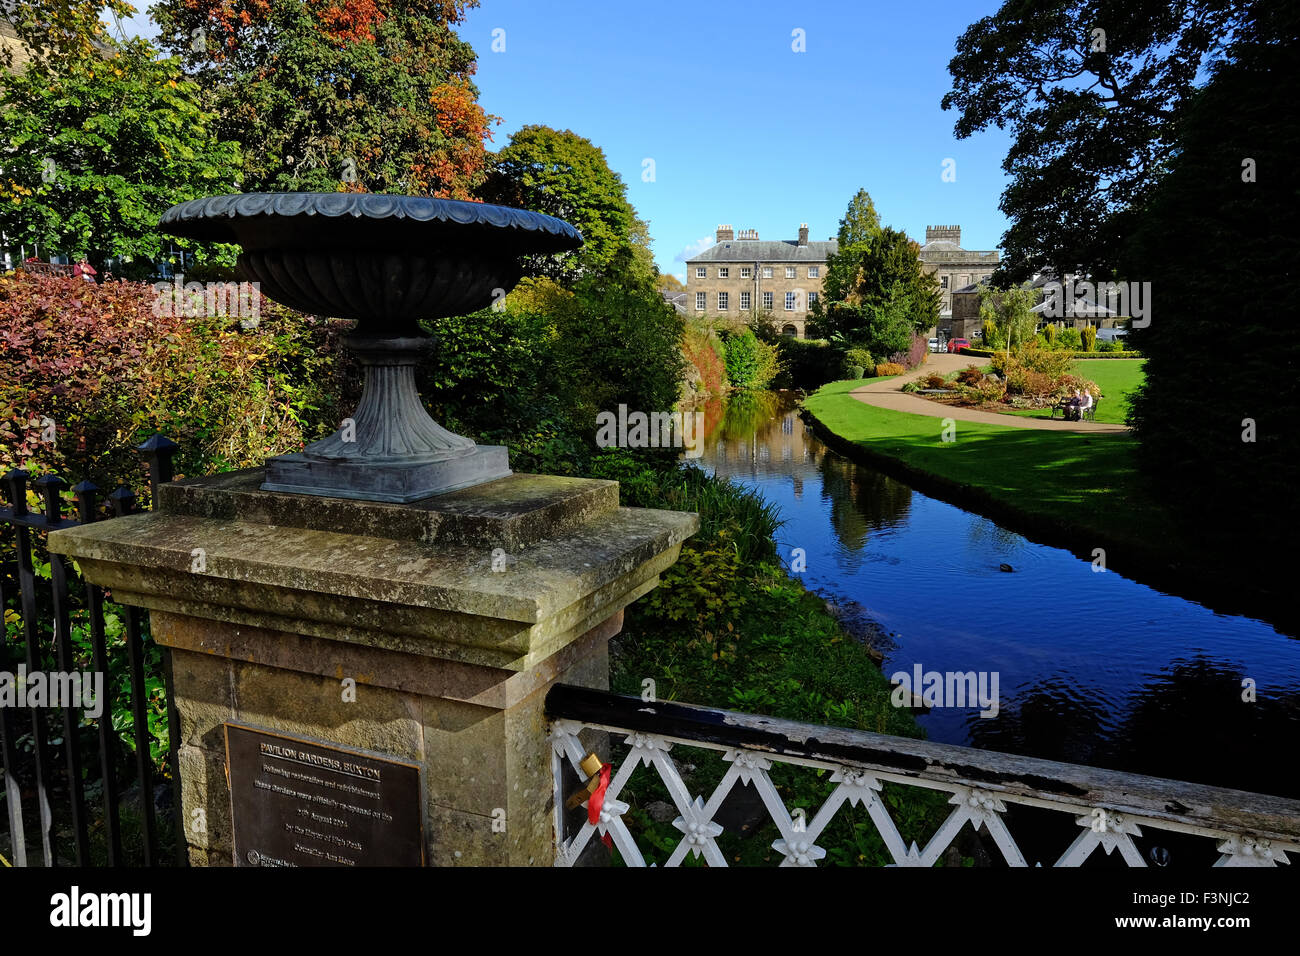 The Pavilion Gardens in The spa town of Buxton, Derbyshire . Stock Photo